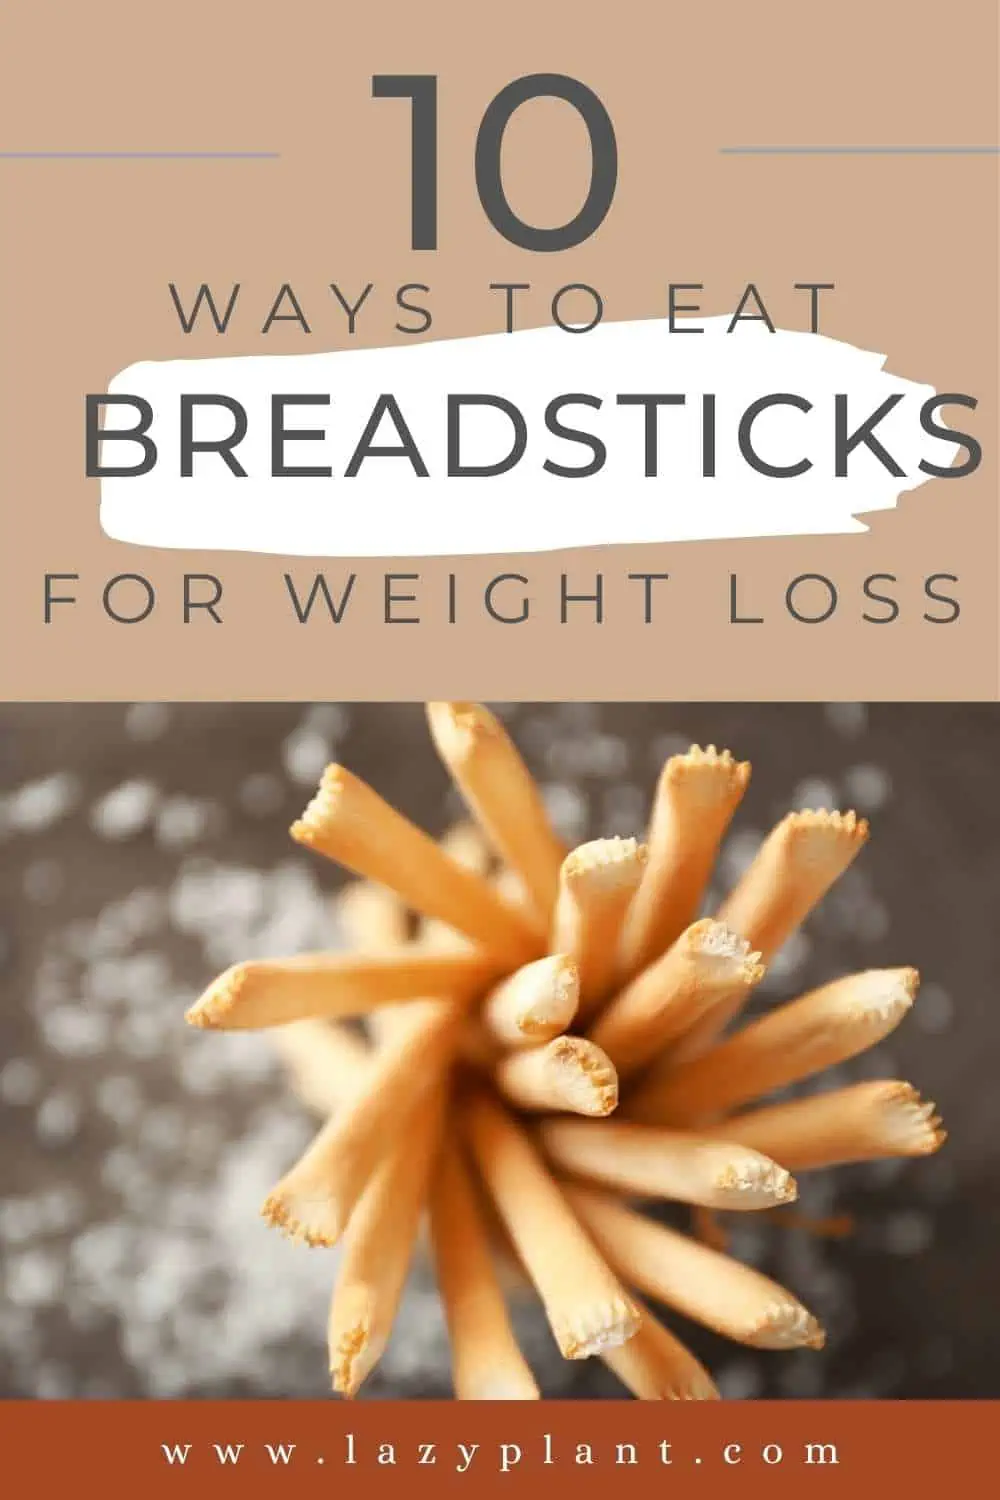 How to eat breadsticks for weight loss?